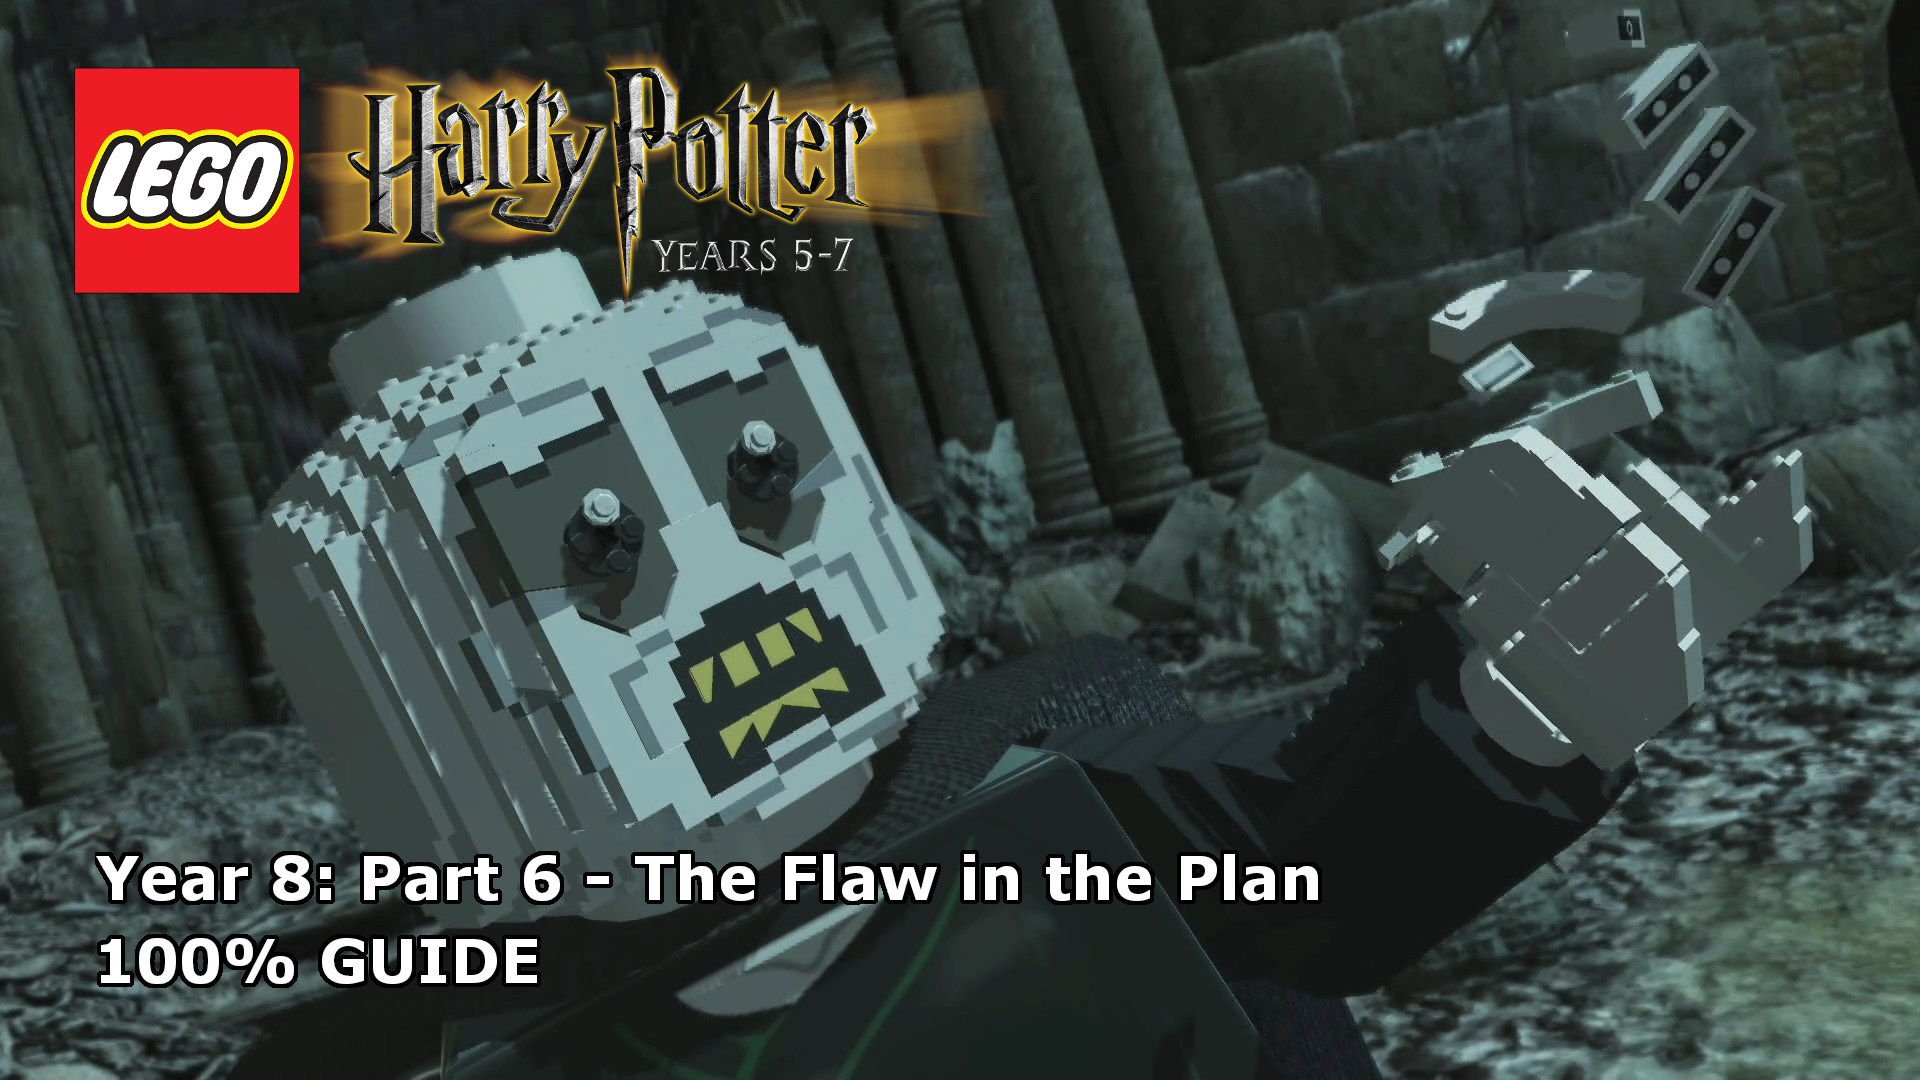 Lego Potter: Years 5-7 The Flaw the 100% Guide